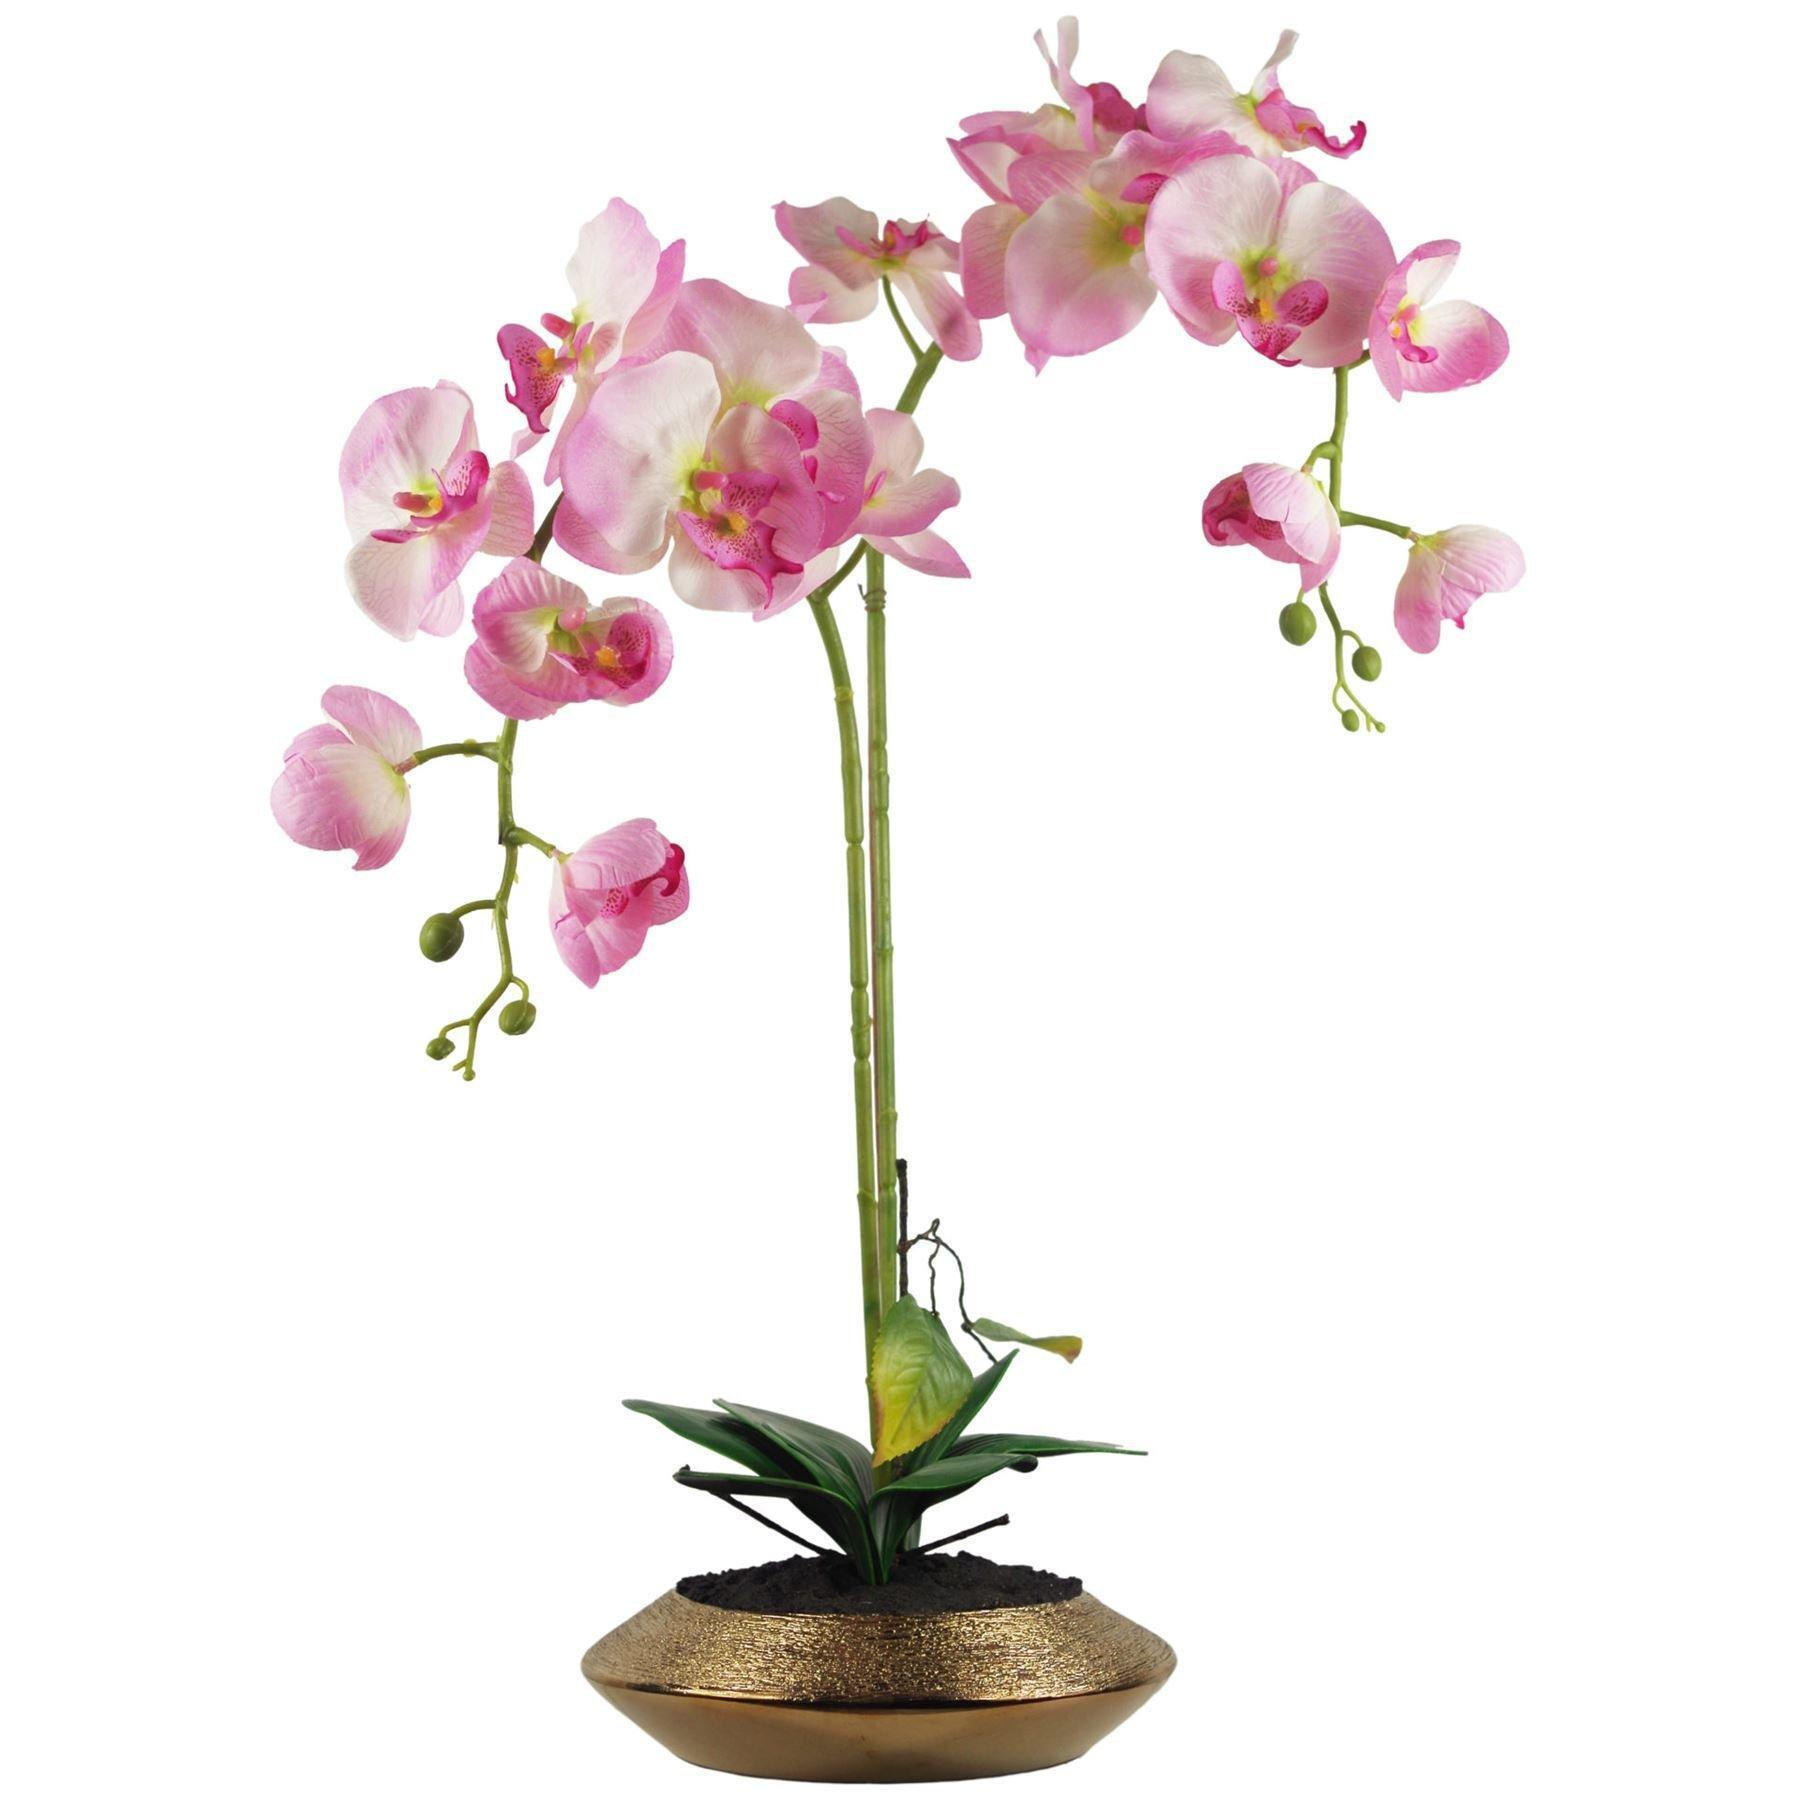 70cm Artificial Orchid Light Pink with Gold Dish Ceramic Planter - image 1